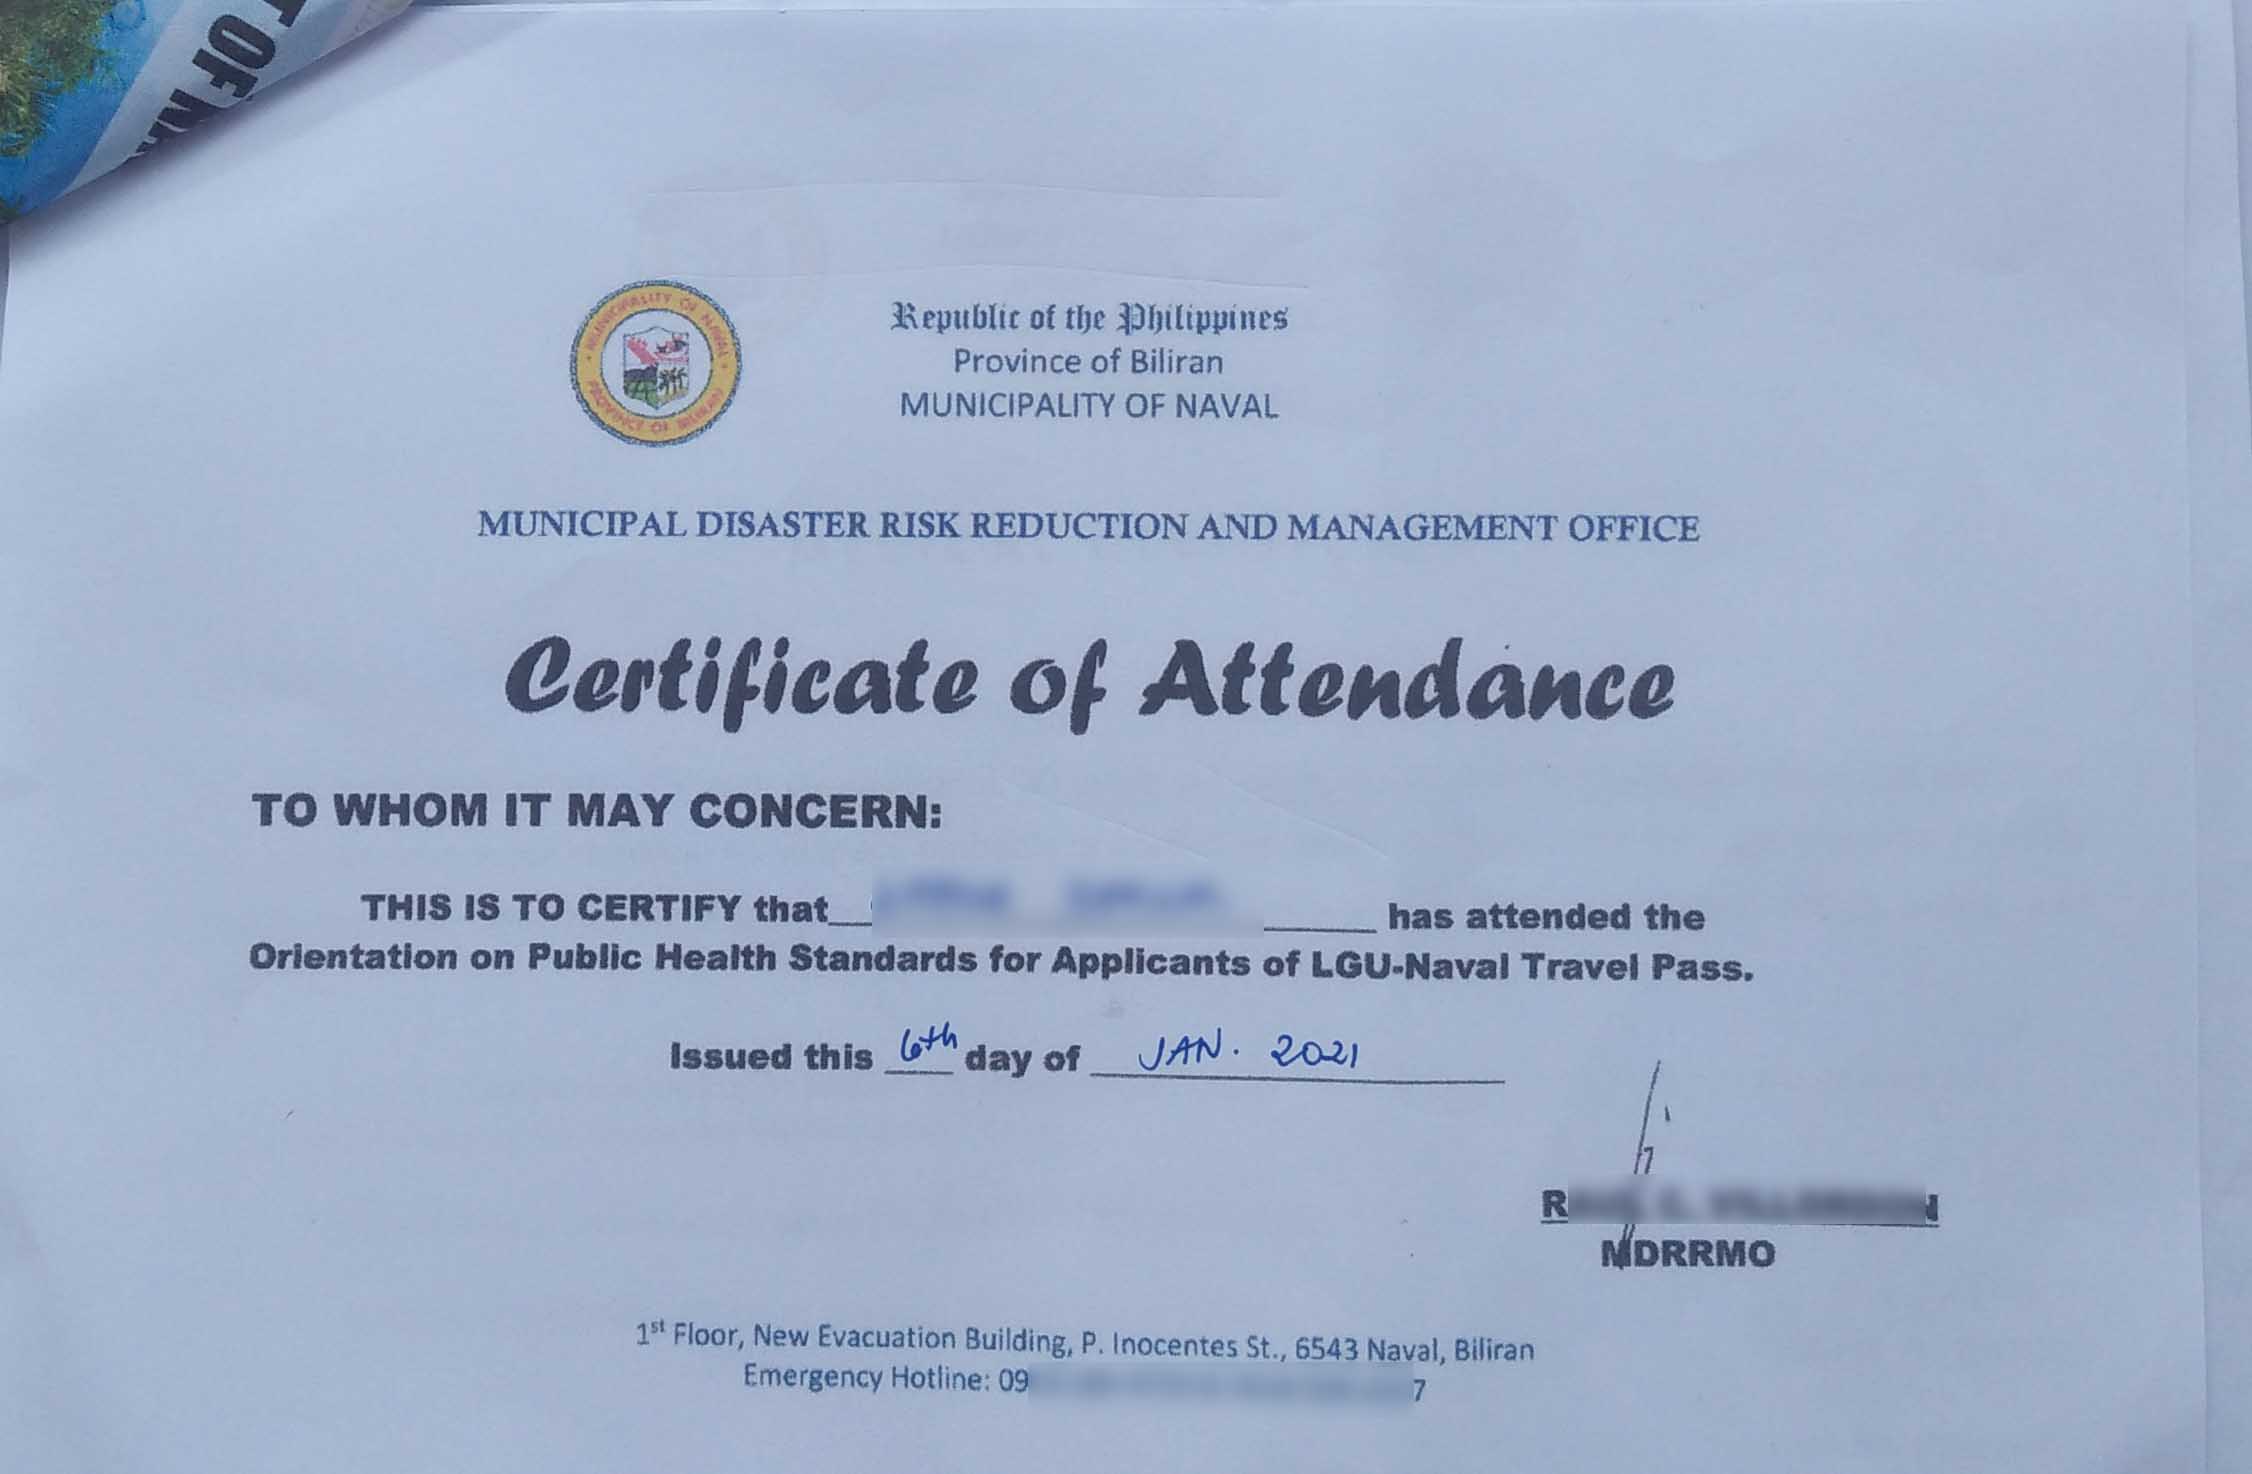 Certificate of Attendance for the Orie3ntation on Public Health Standards for Applicants of LGU-Naval Travel Pass issued by the Municipal Disaster Risk Reduction and Management Office.